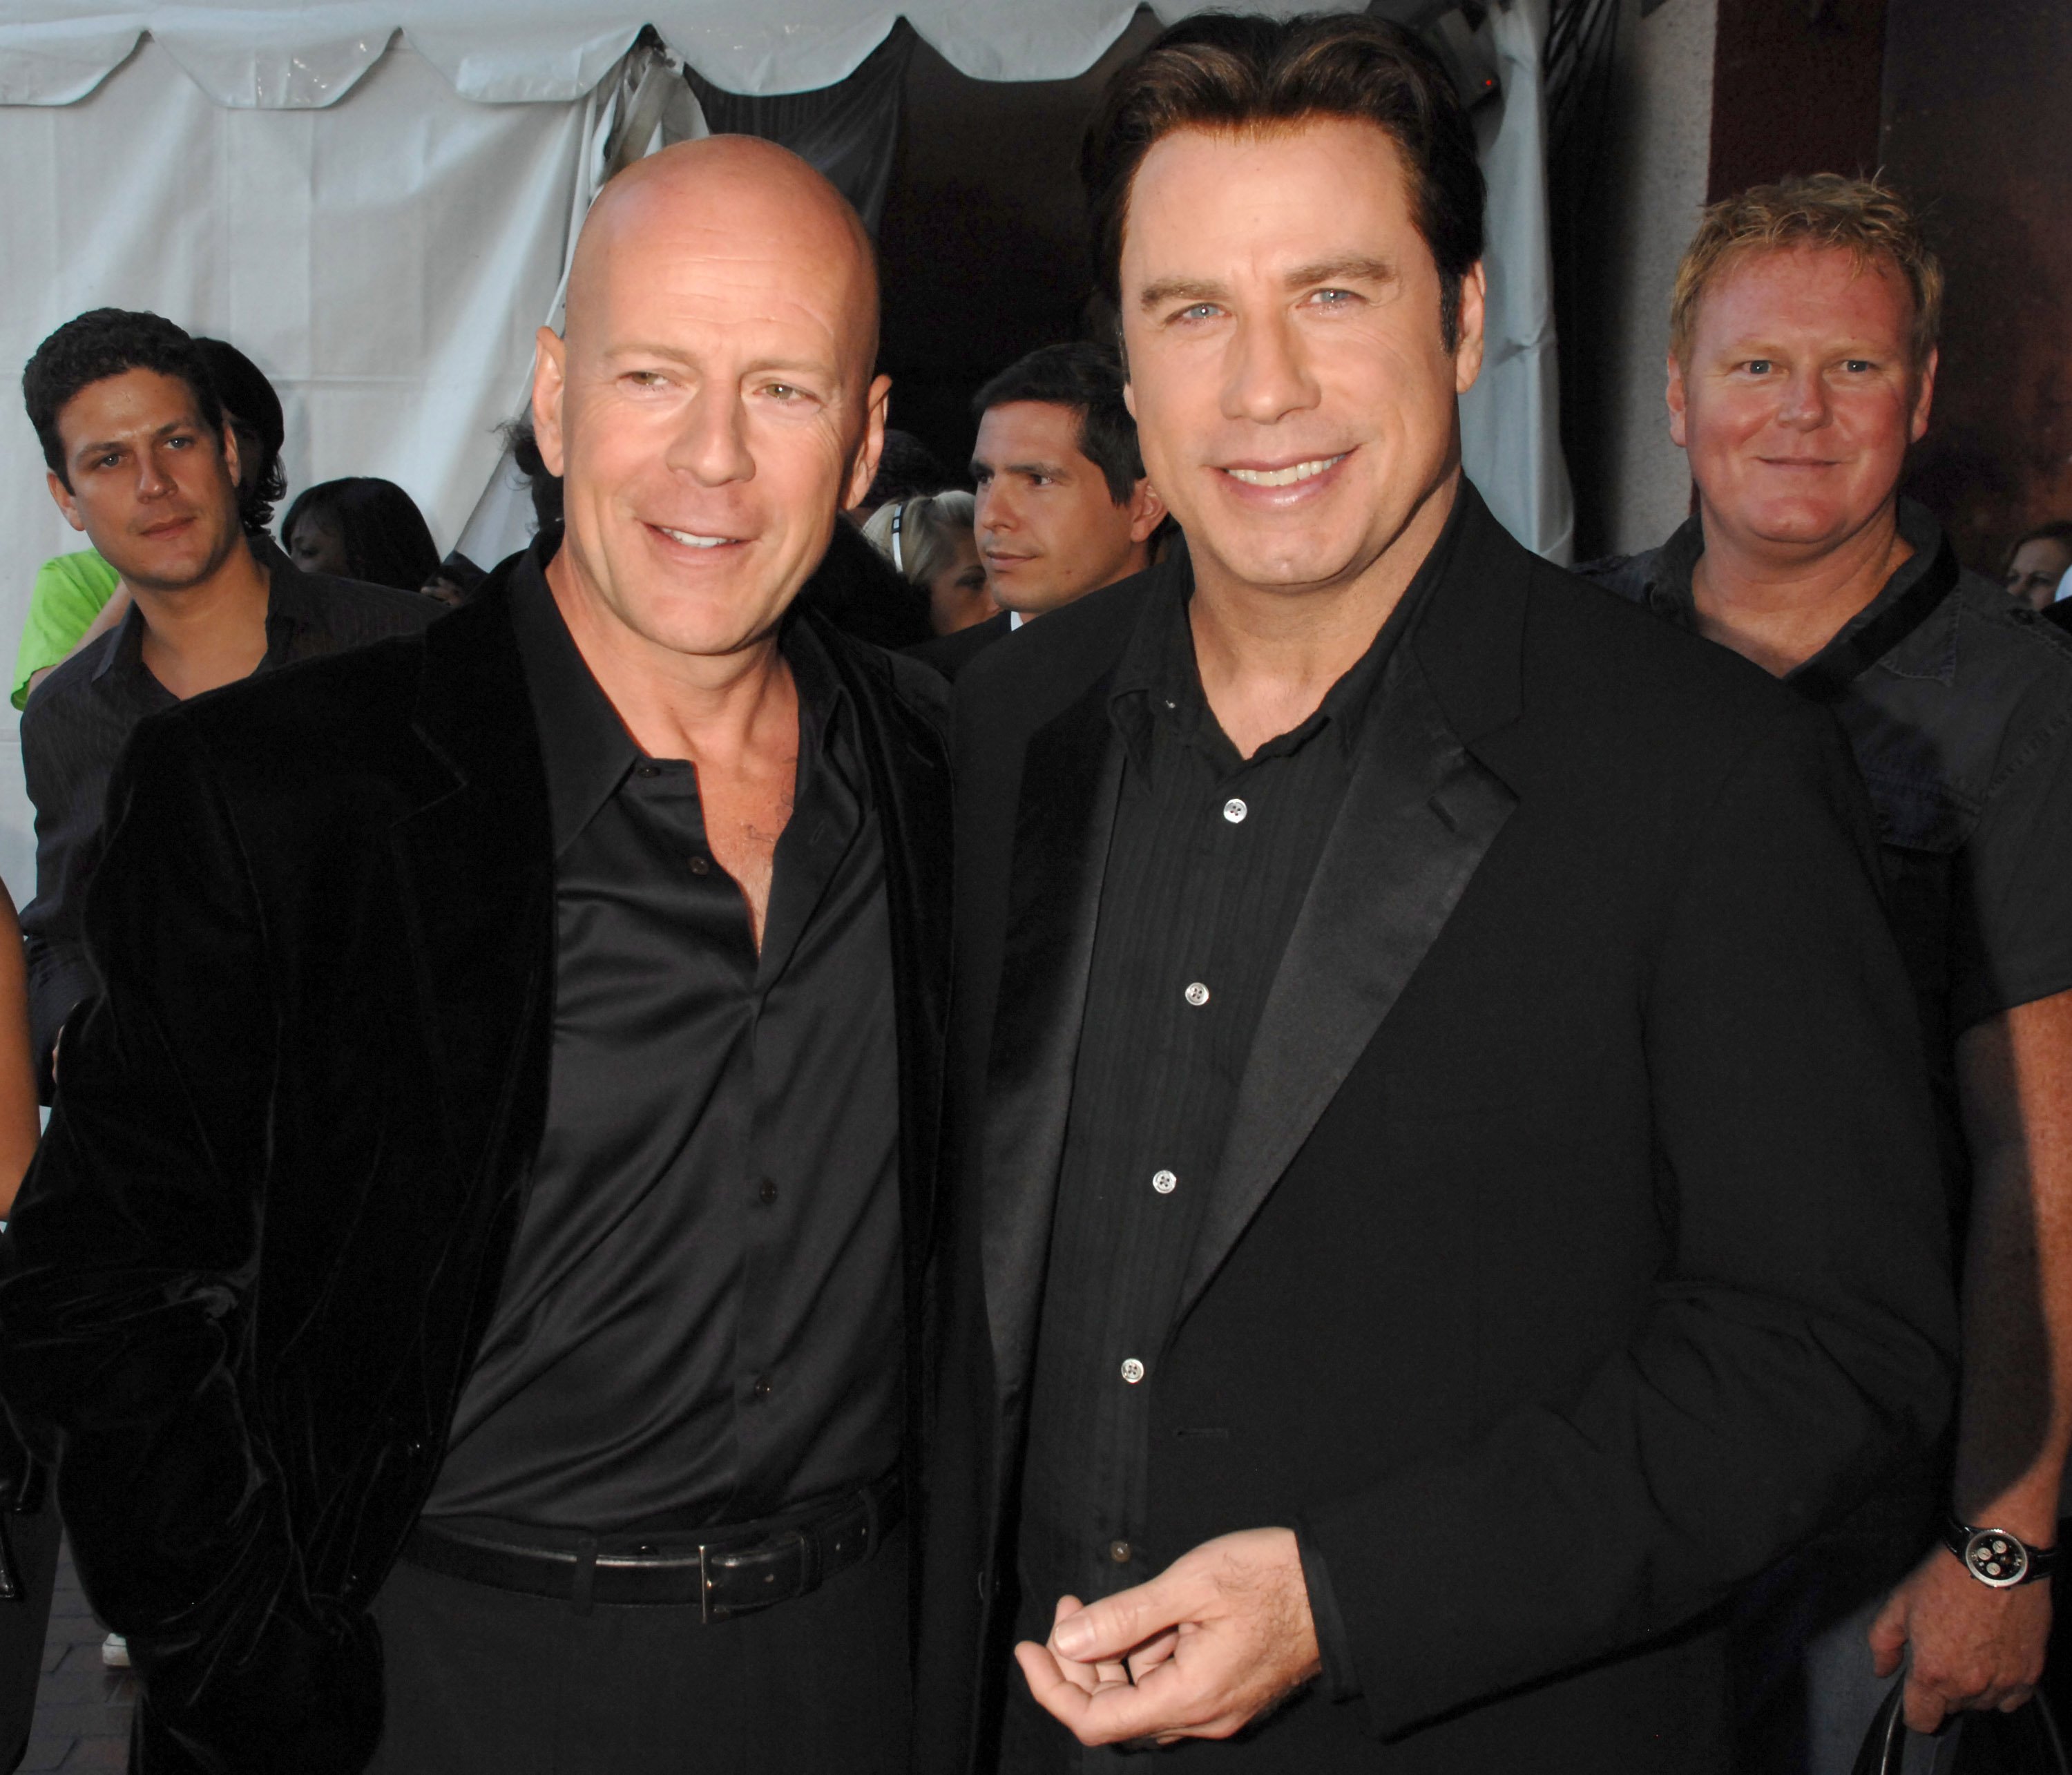 An undated image of Bruce Willis and John Travolta during 2007 MTV Movie Awards in Los Angeles, California | Photo: Getty Images